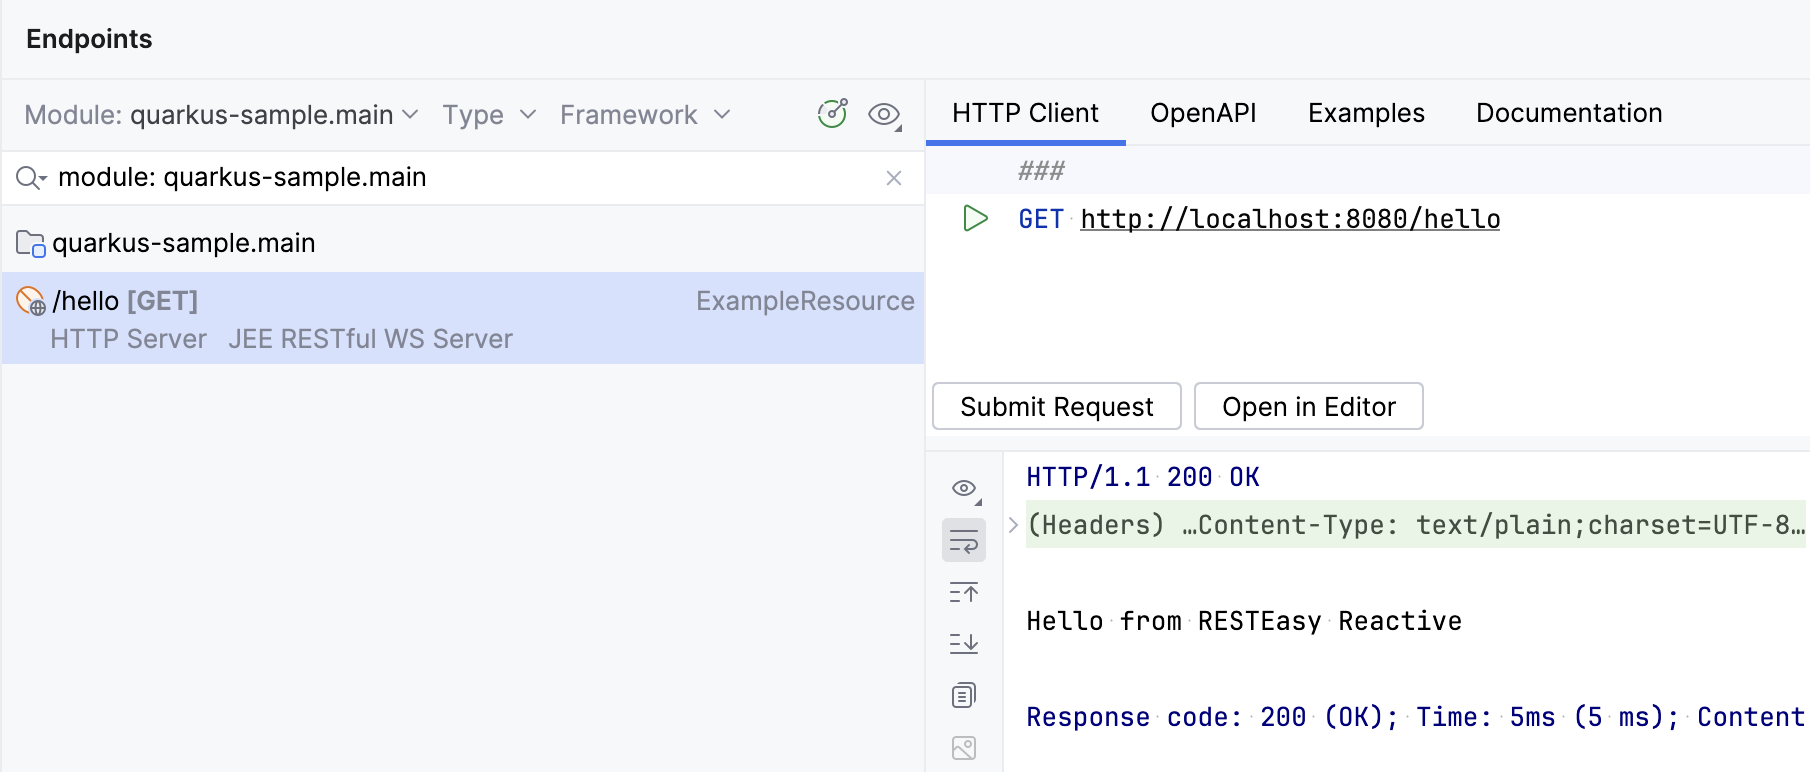 ExampleResource endpoint in the Endpoints tool window